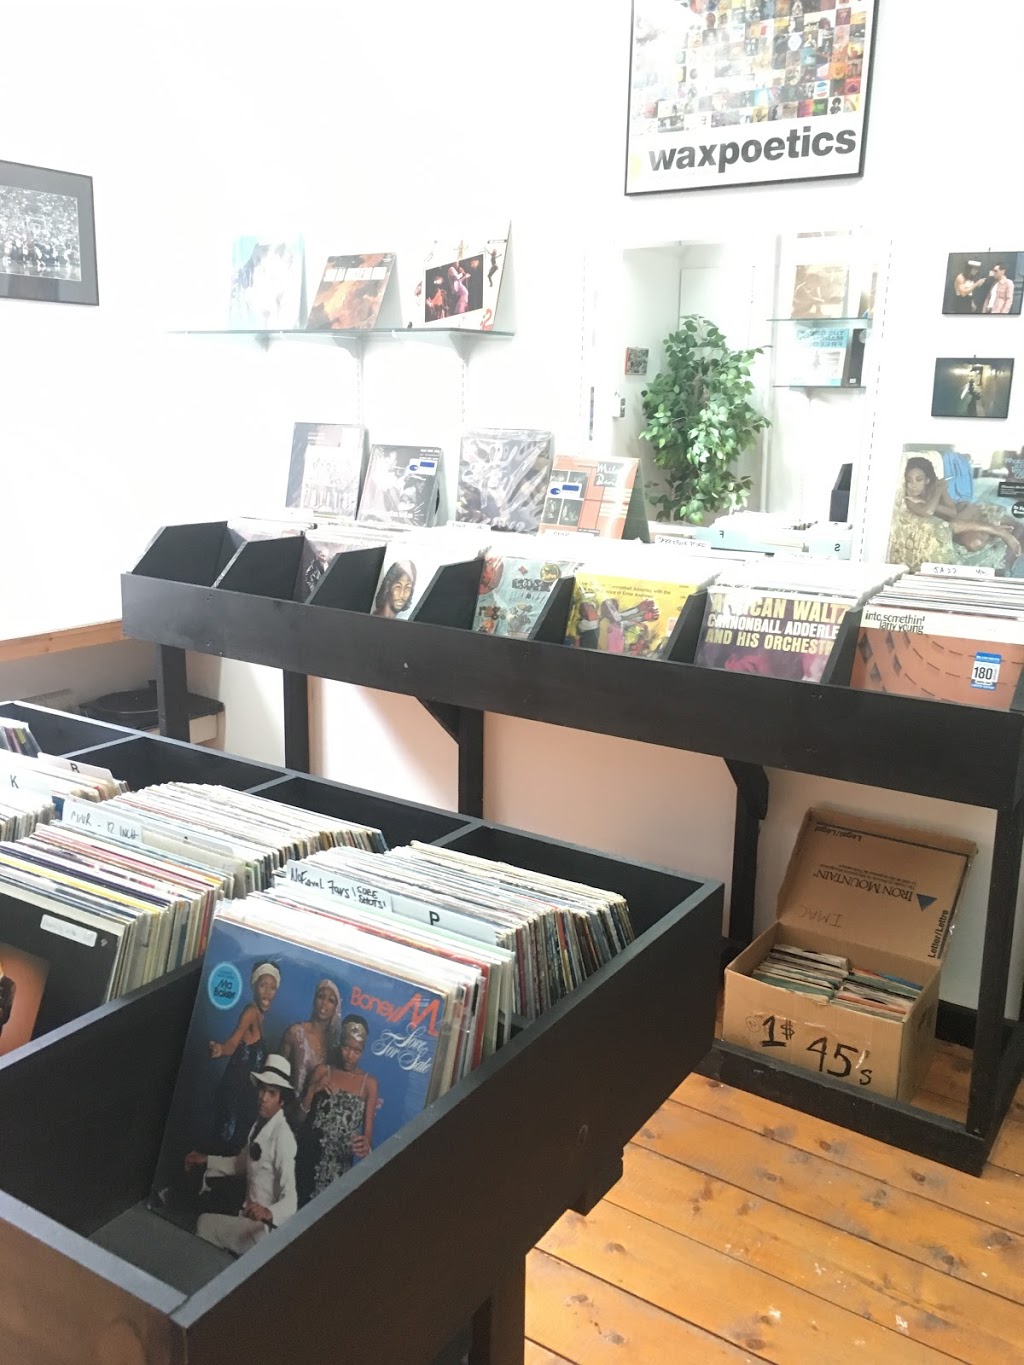 No Equal Records | electronics store | 2 Clifts - Bairds Cove, St. Johns, NL A1C 6M9, Canada | 7092377222 OR +1 709-237-7222